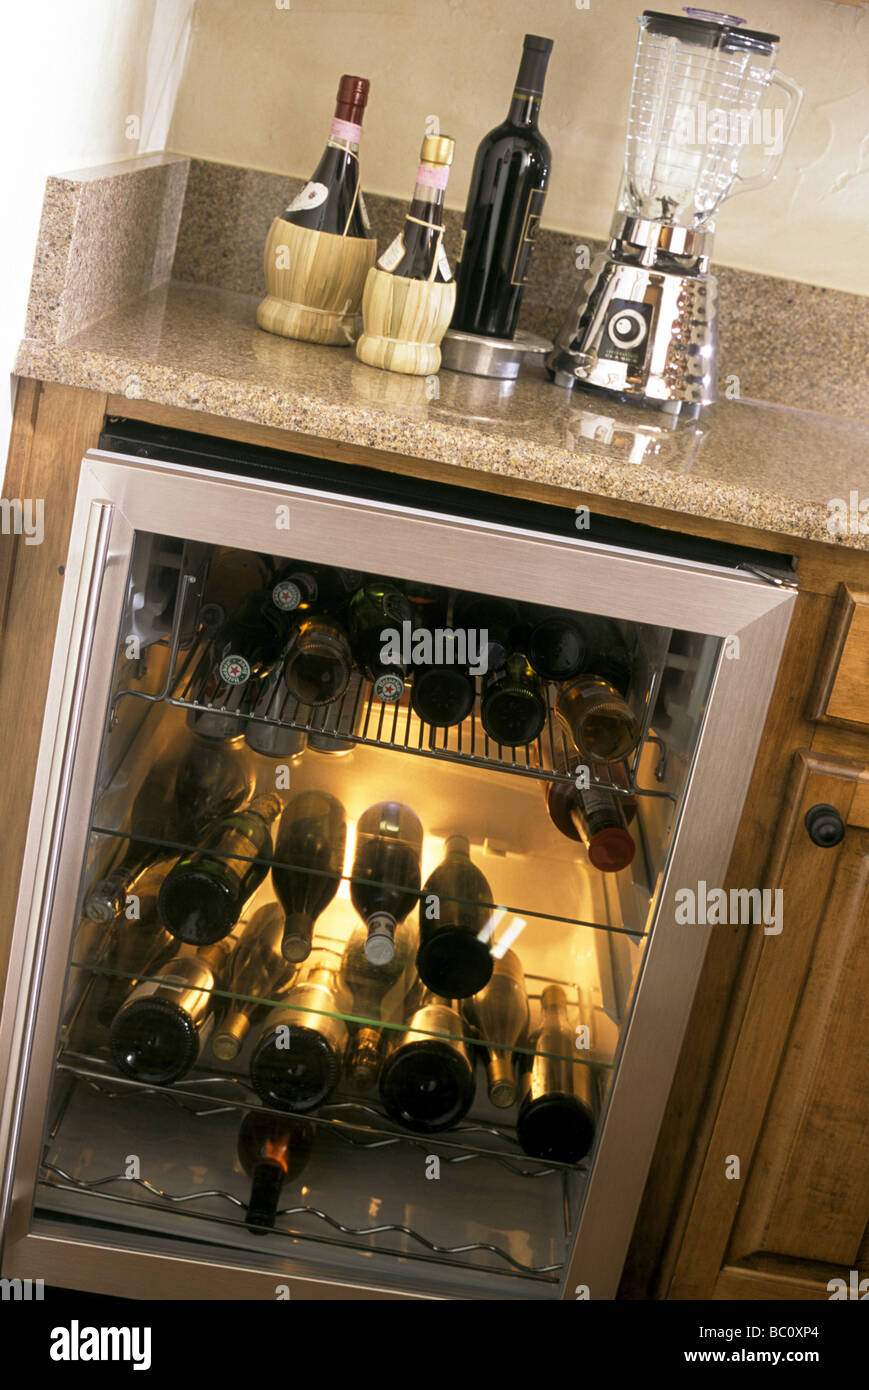 in house beverage refrigerator Stock Photo